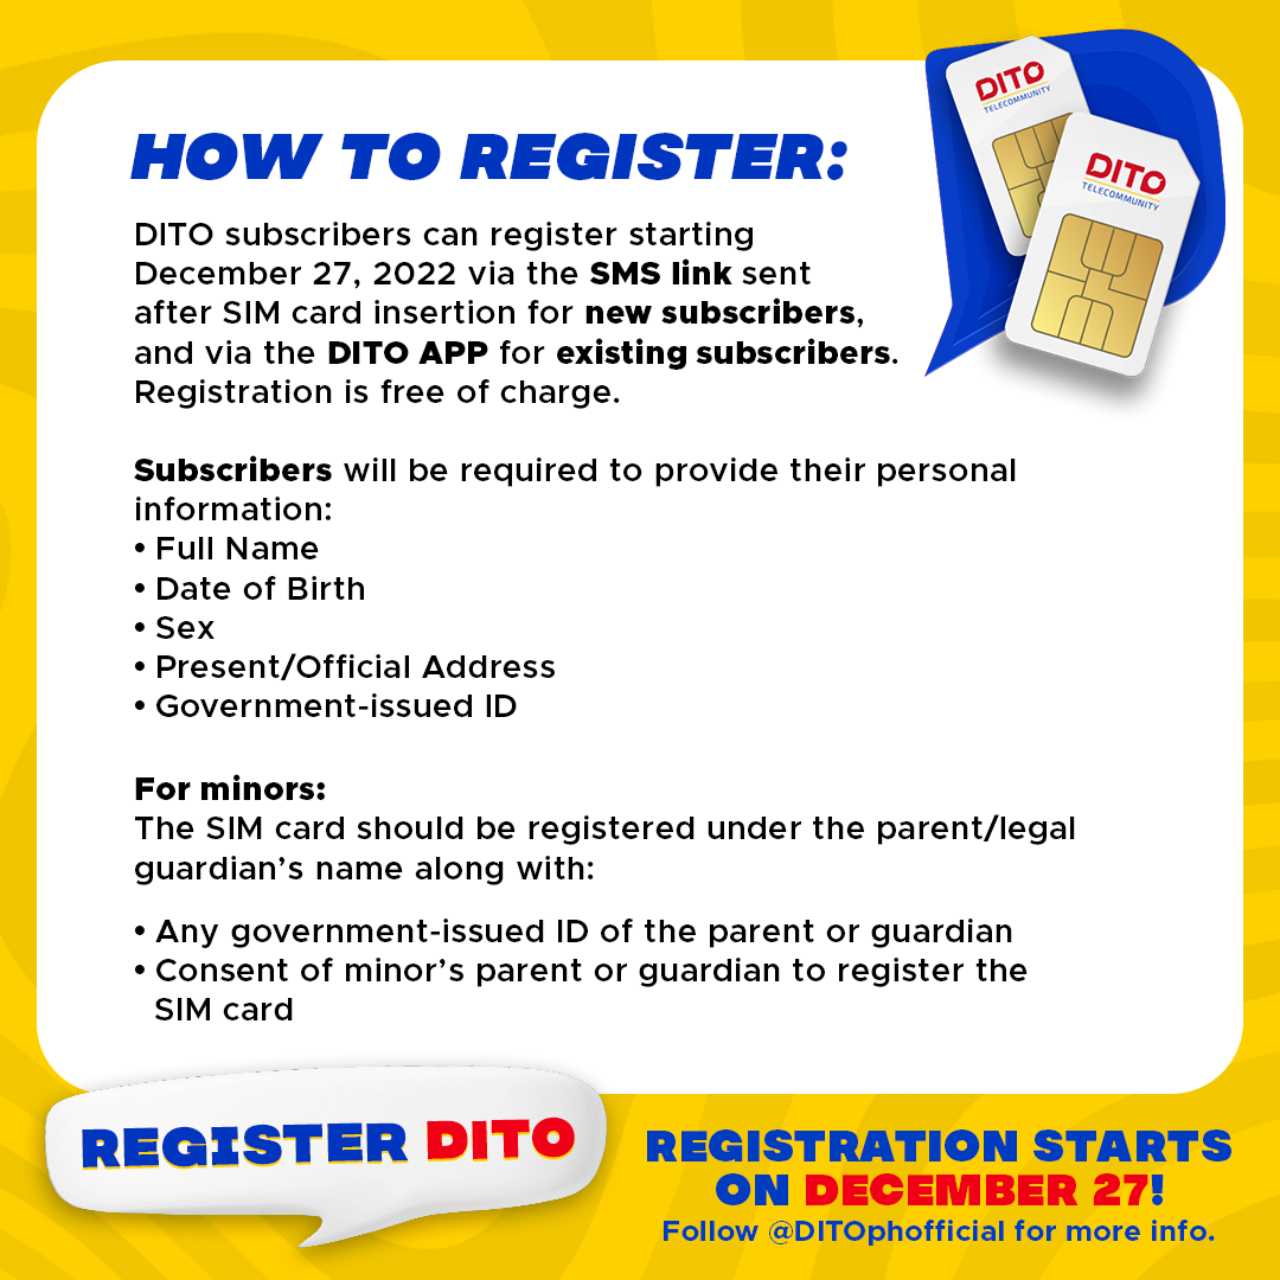 How to Register DITO Sim Card in the Philippines